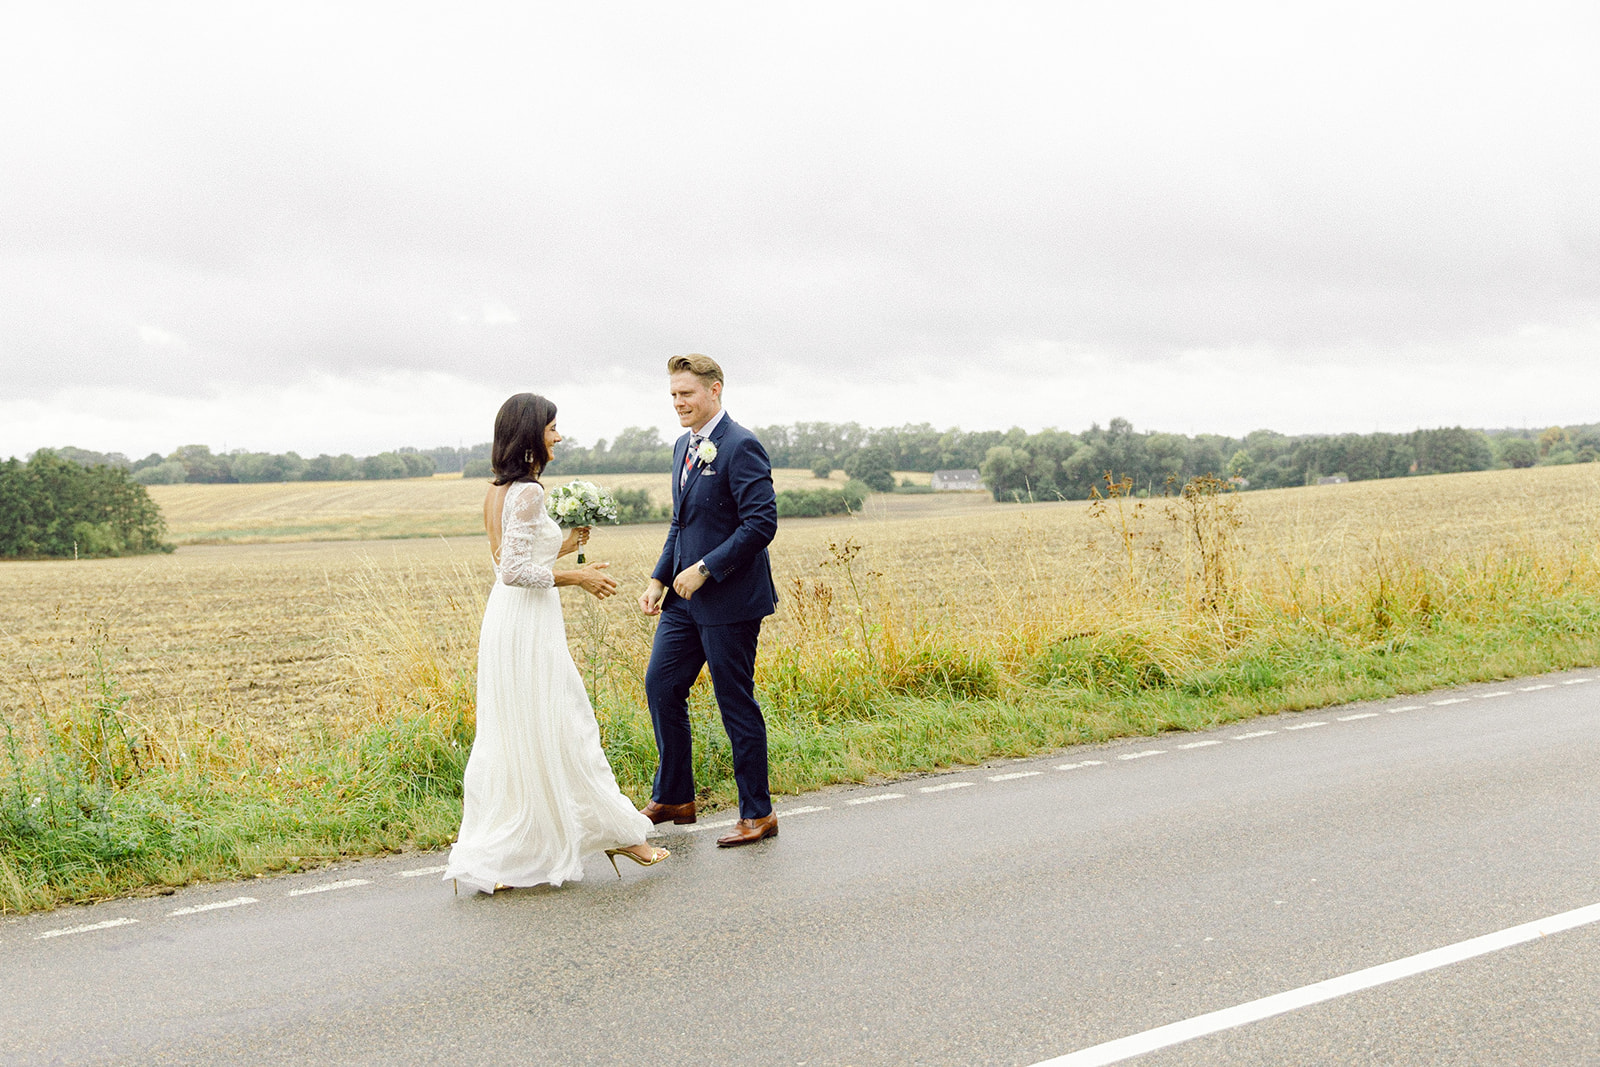 At the heart of Denmark, a Danish-American couple finds their forever love.  Walking on a road freely and happy.